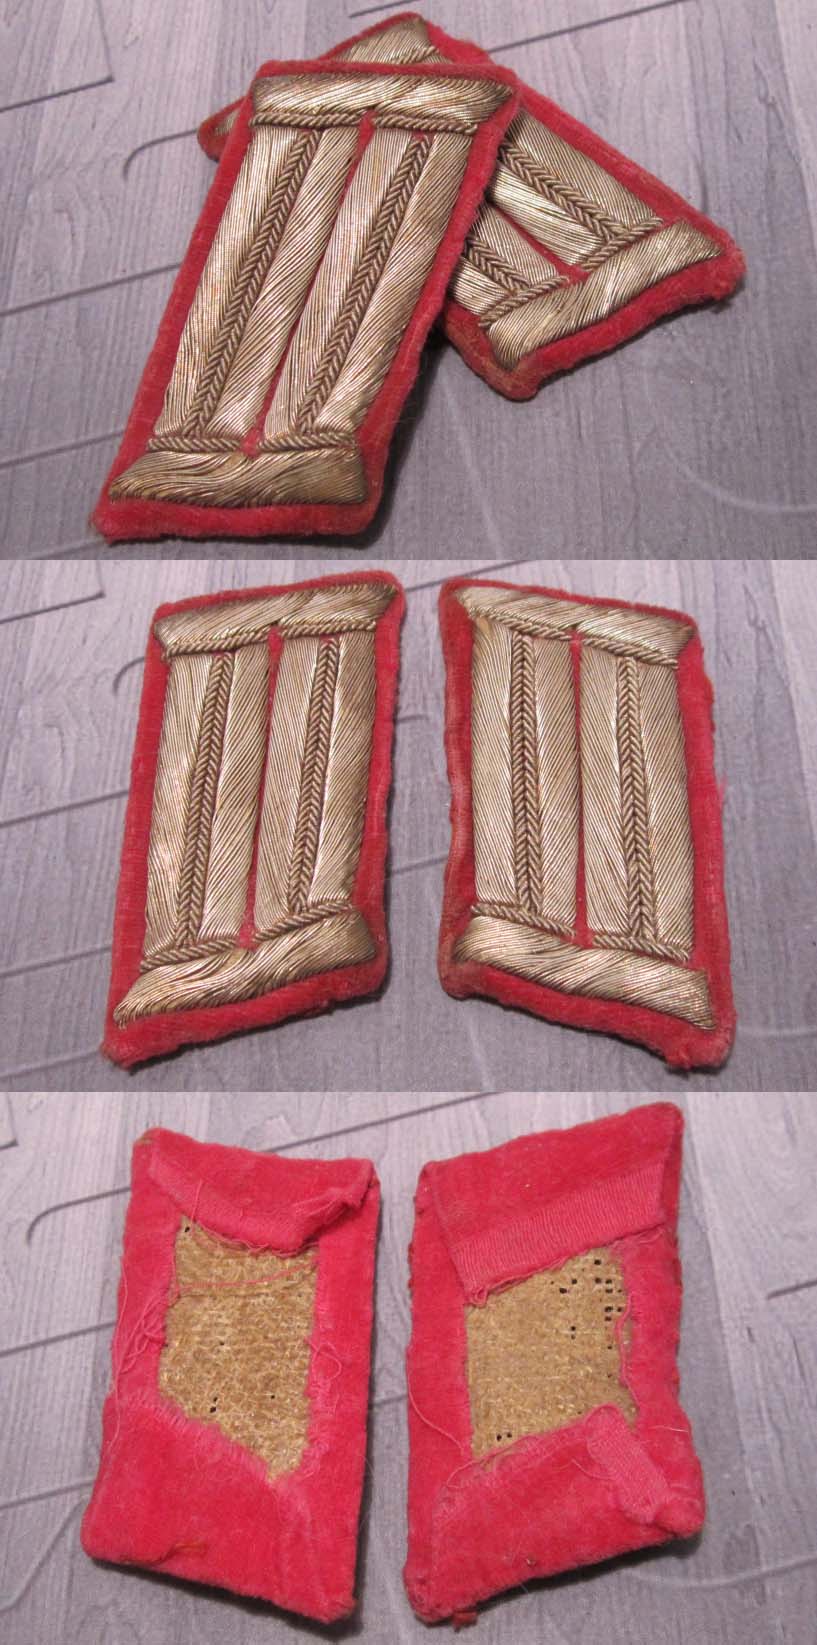 Fire Officer's Shoulderboards and collar tabs